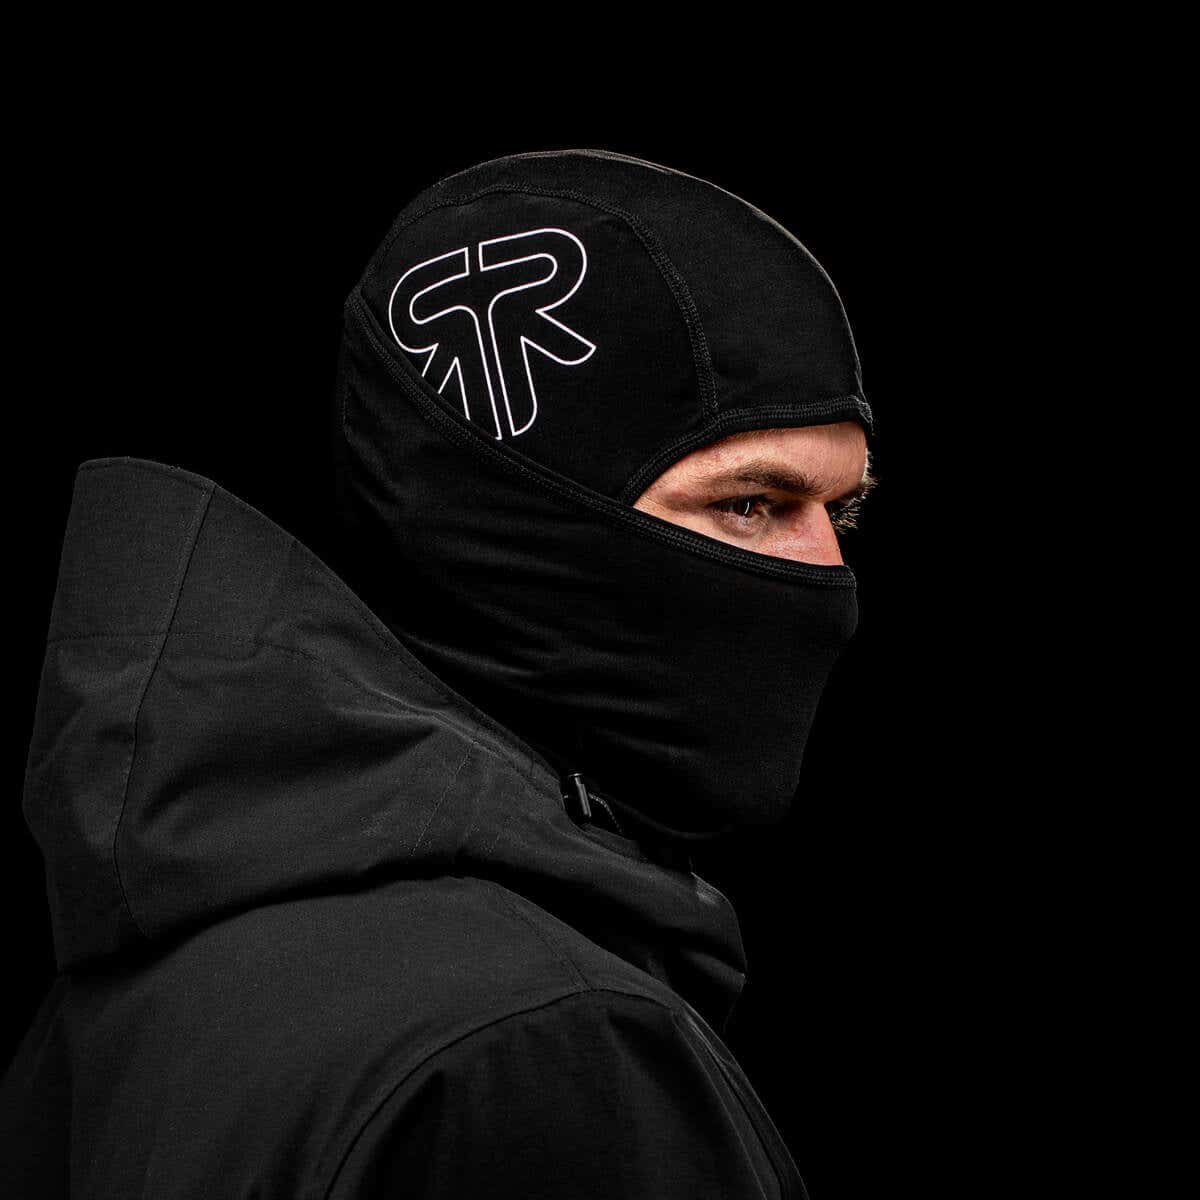 The 10 best balaclavas and hoods for the cold season ahead - shop now